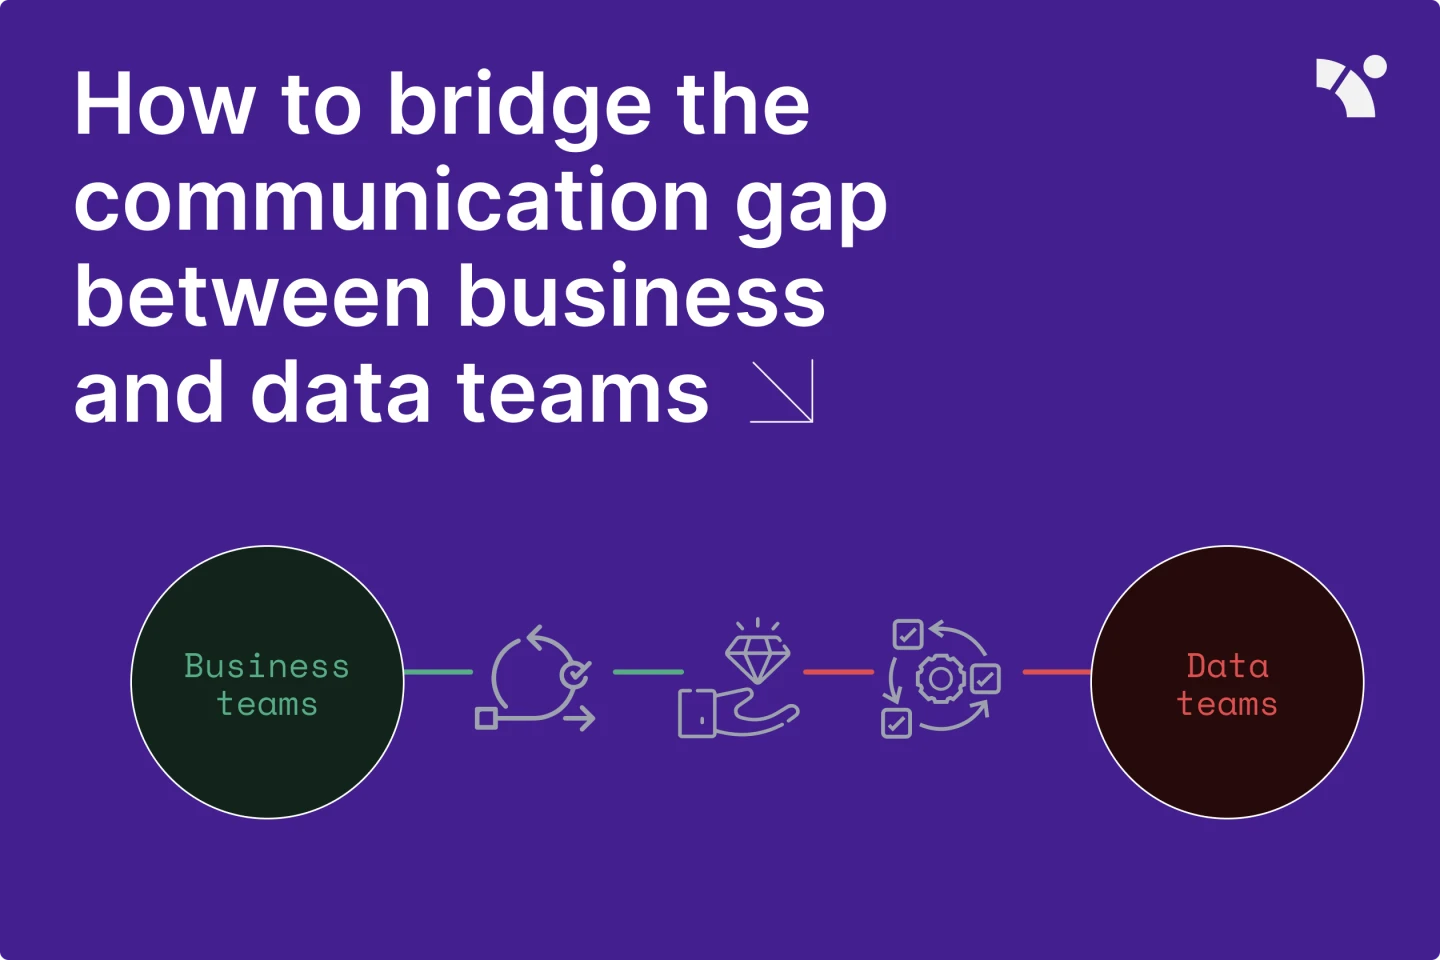 Business and data team communication gaps